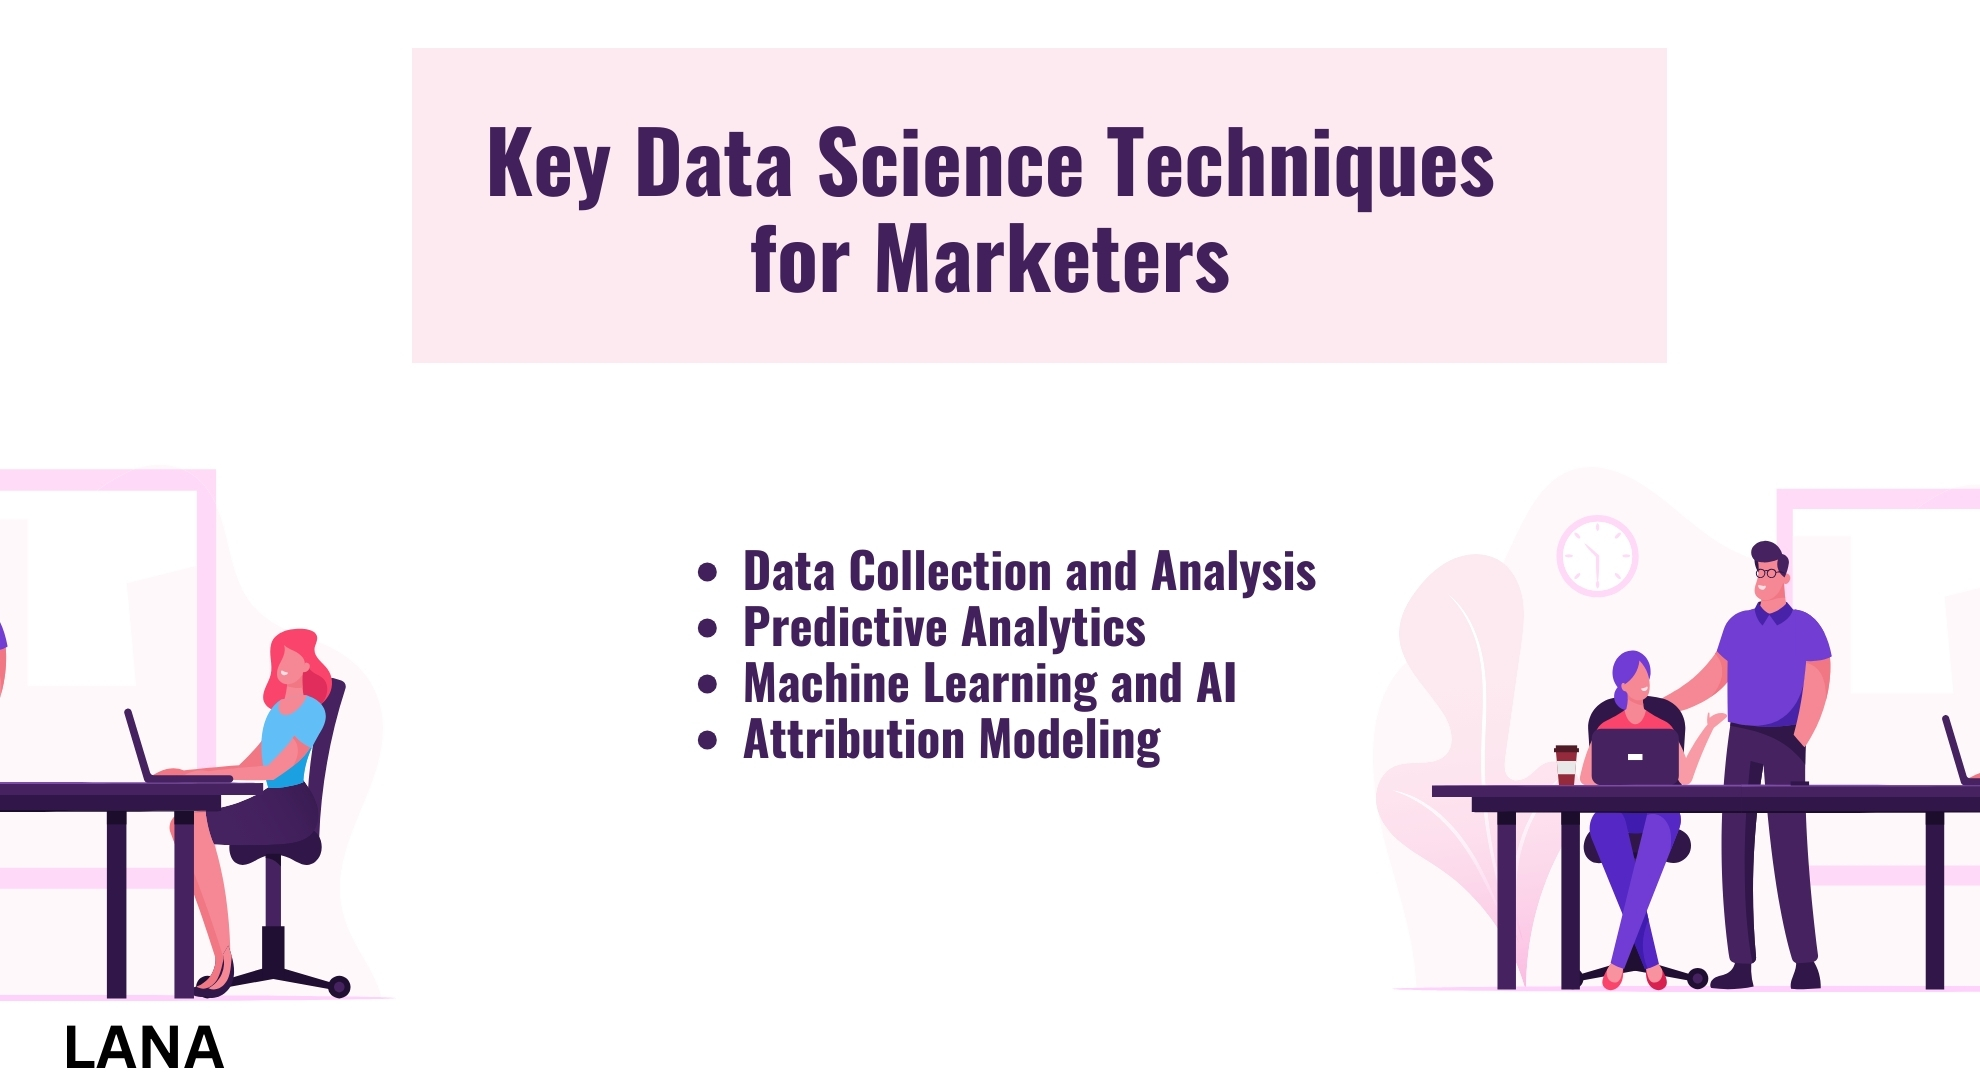 Key Data Science Techniques for Marketers